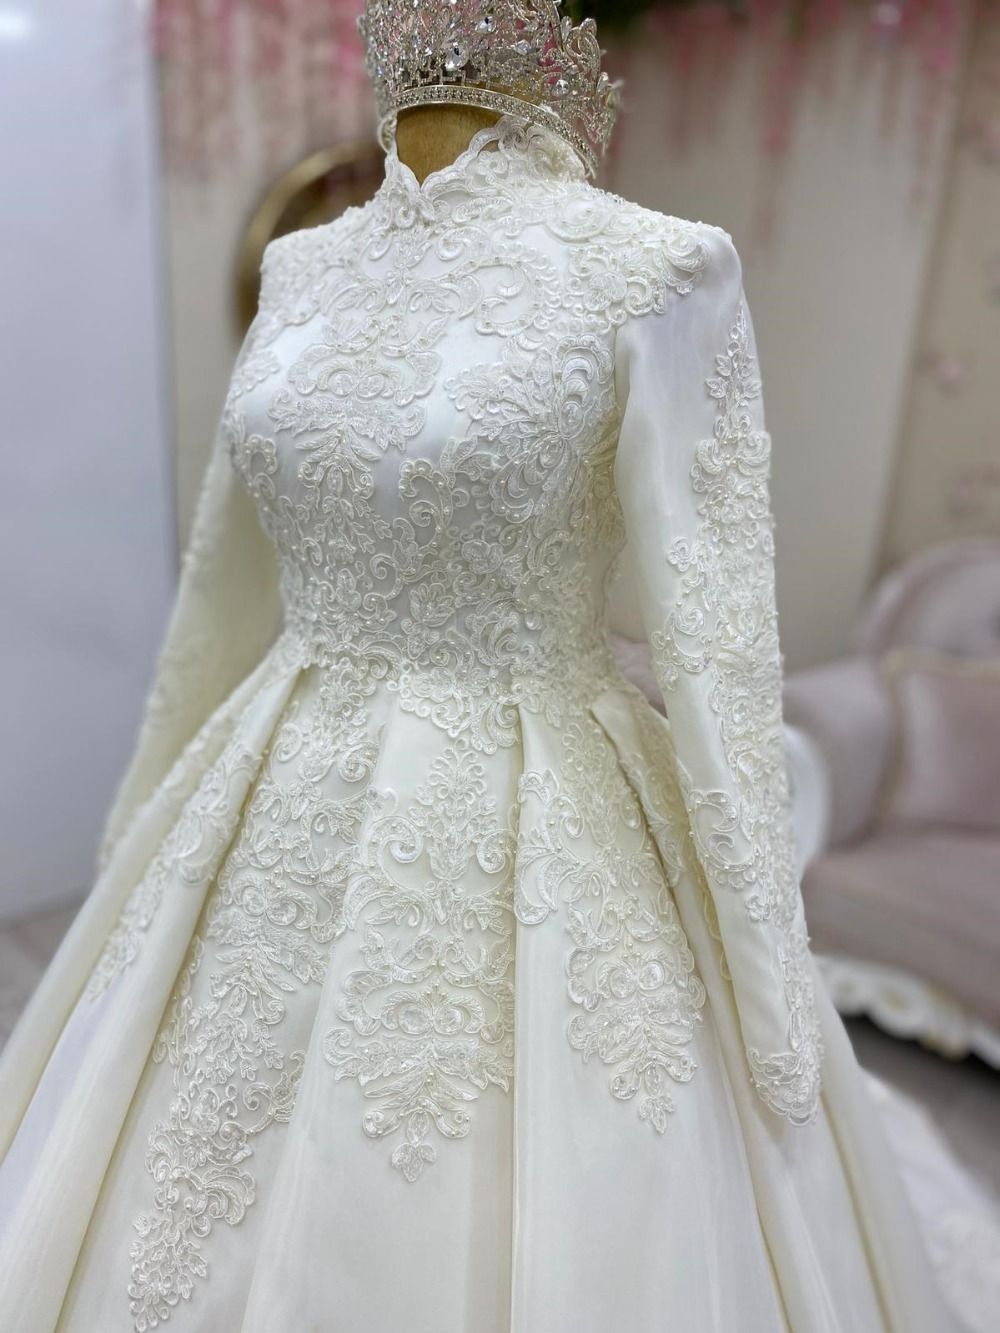 Vintage Islamic Muslim A Line Wedding Dresses Bridal Gowns Pattern Lace Appliques High Collar Long Sleeves Beading Arabic Dubai Formal Bride Dress 2022 From Sexybride, $142.07 DHgate image